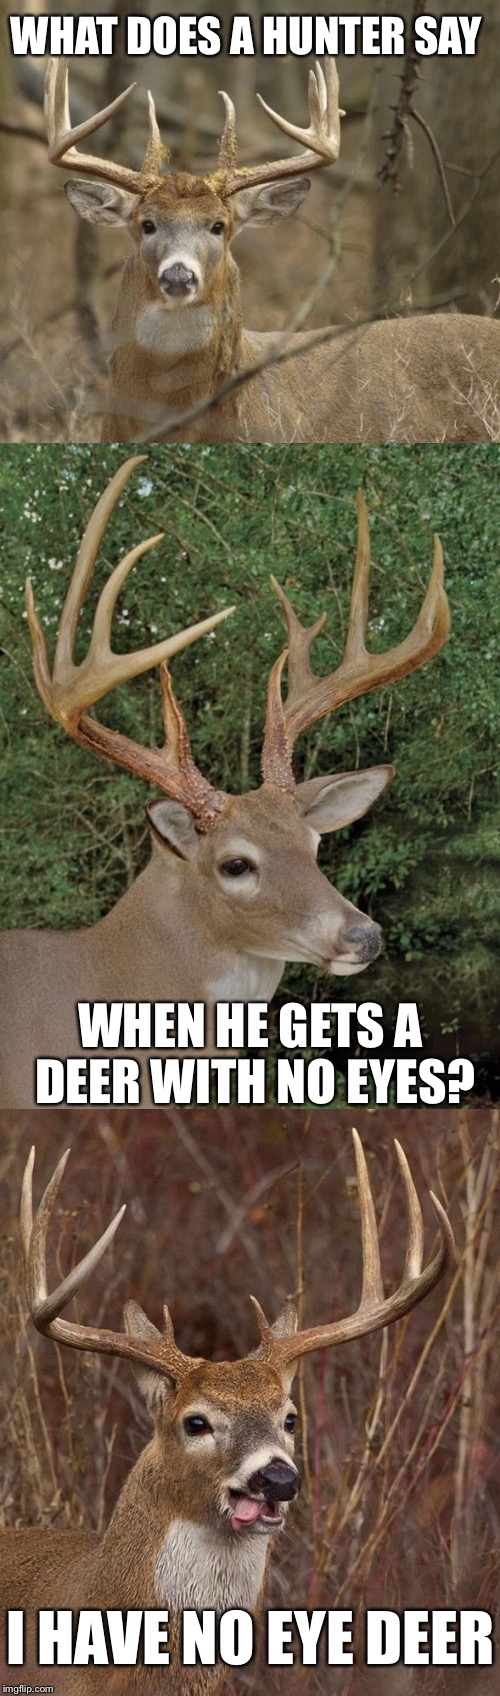 Bad Pun Buck | WHAT DOES A HUNTER SAY; WHEN HE GETS A DEER WITH NO EYES? I HAVE NO EYE DEER | image tagged in bad pun buck,memes,bad pun,bad puns,funny | made w/ Imgflip meme maker